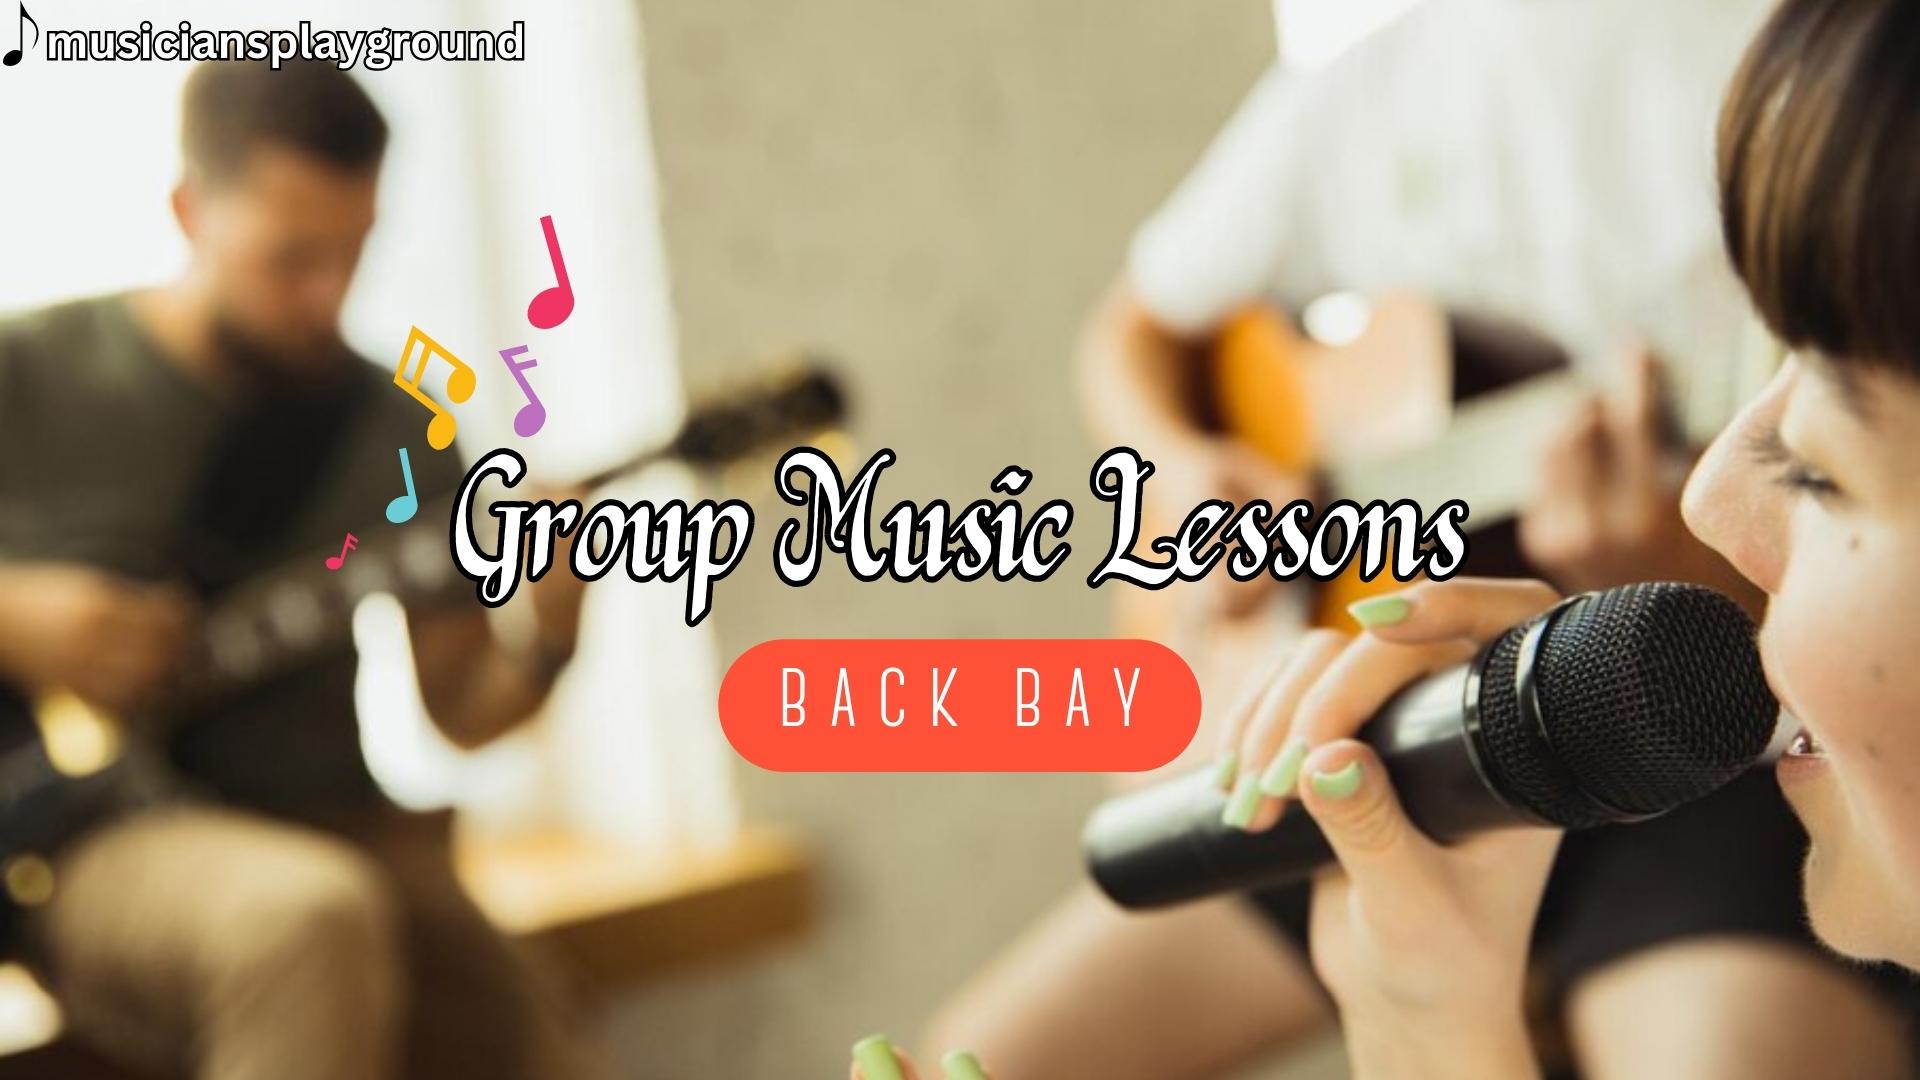 Group Music Lessons in Back Bay: Enhance Your Musical Skills at Musicians Playground